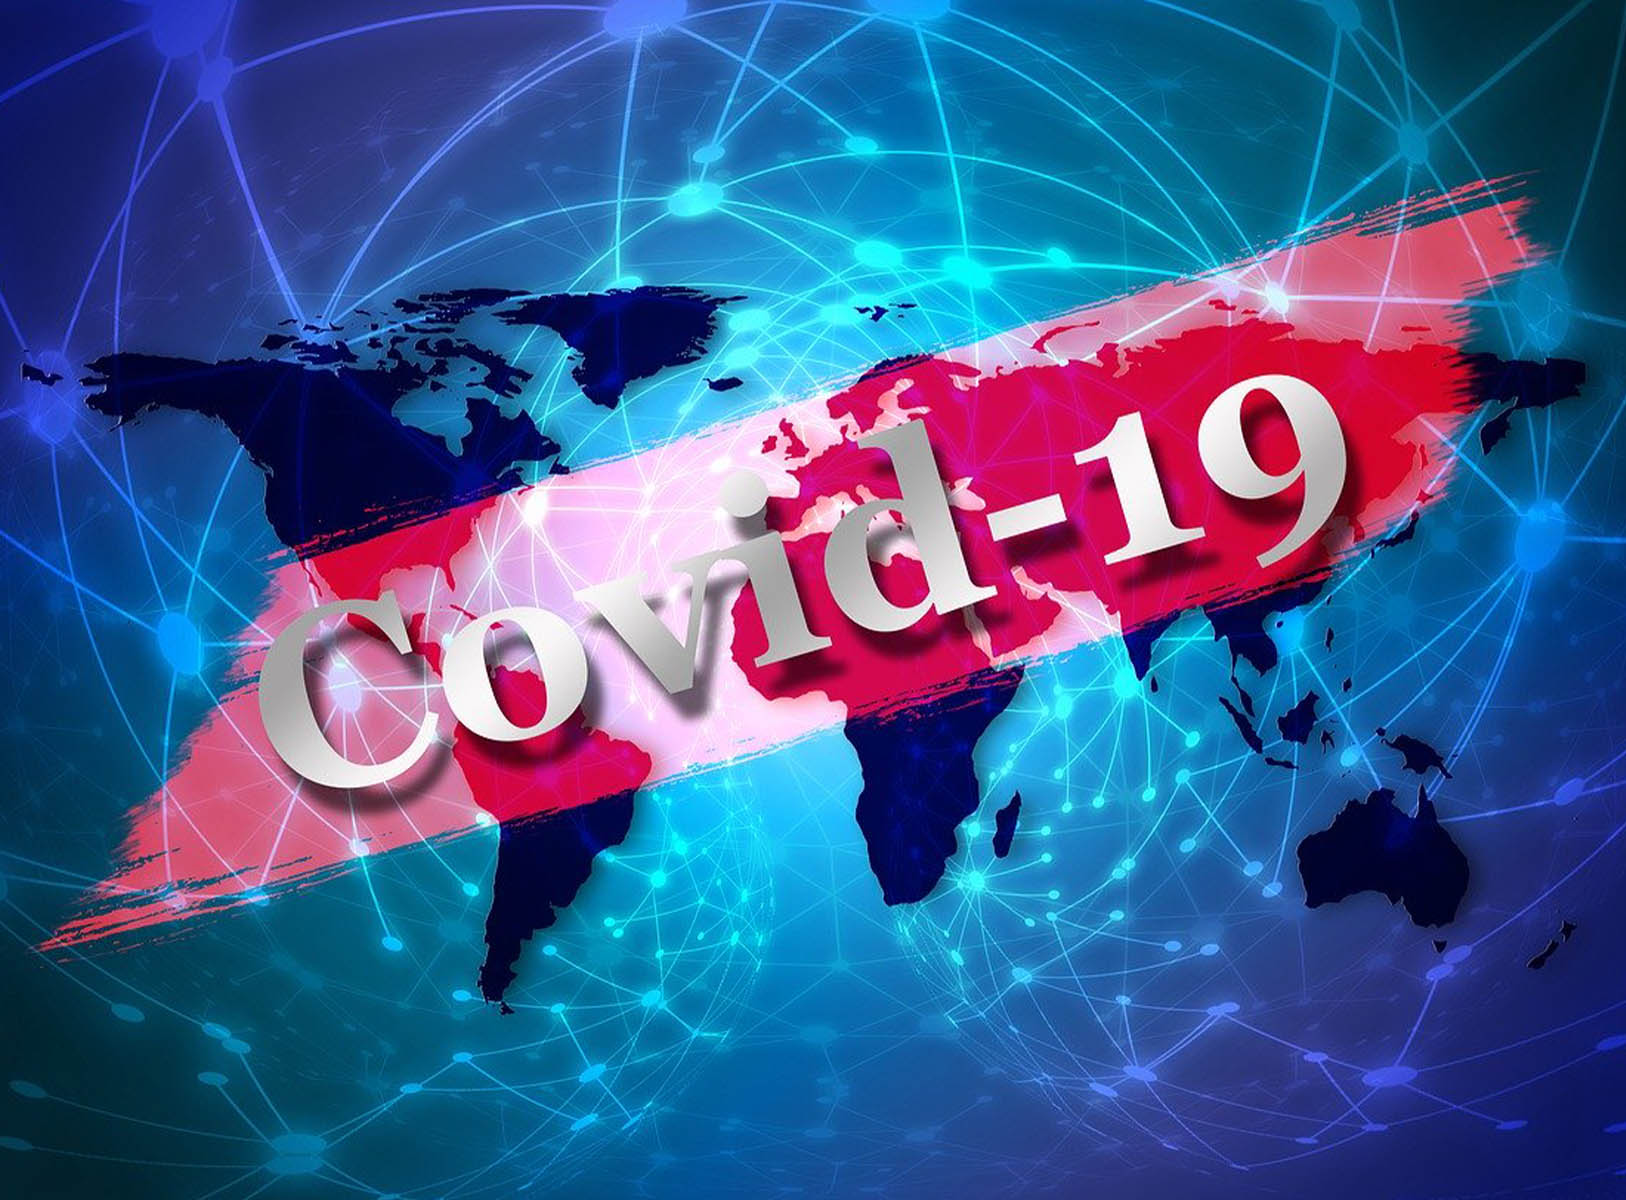 Announcements towards the impact by outbreak of COVID-19 in Taiwan and China